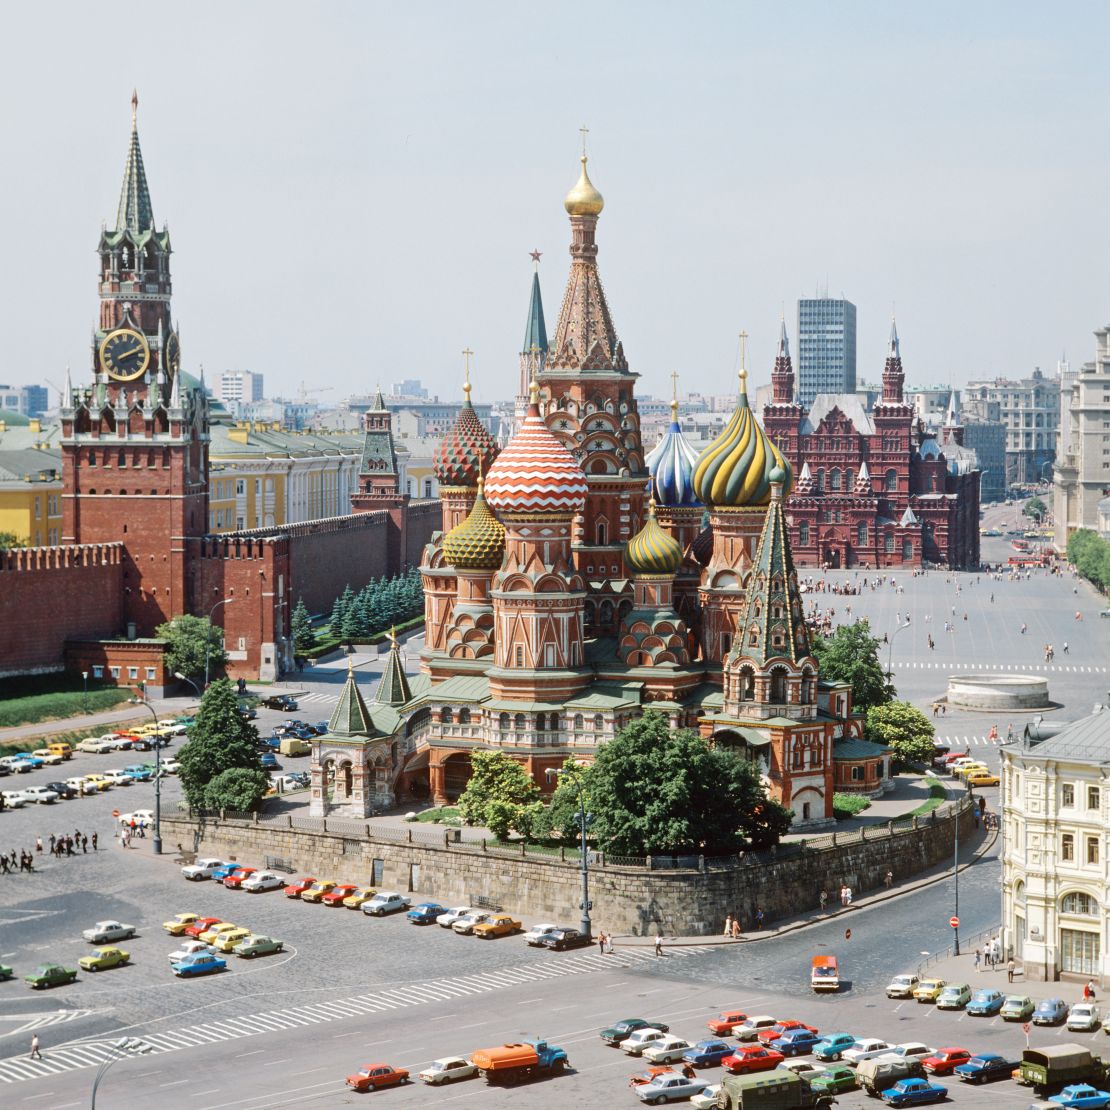 Saint Basil's Cathedral sits in Moscow's Red Square near the fortfied Kremlin complex.